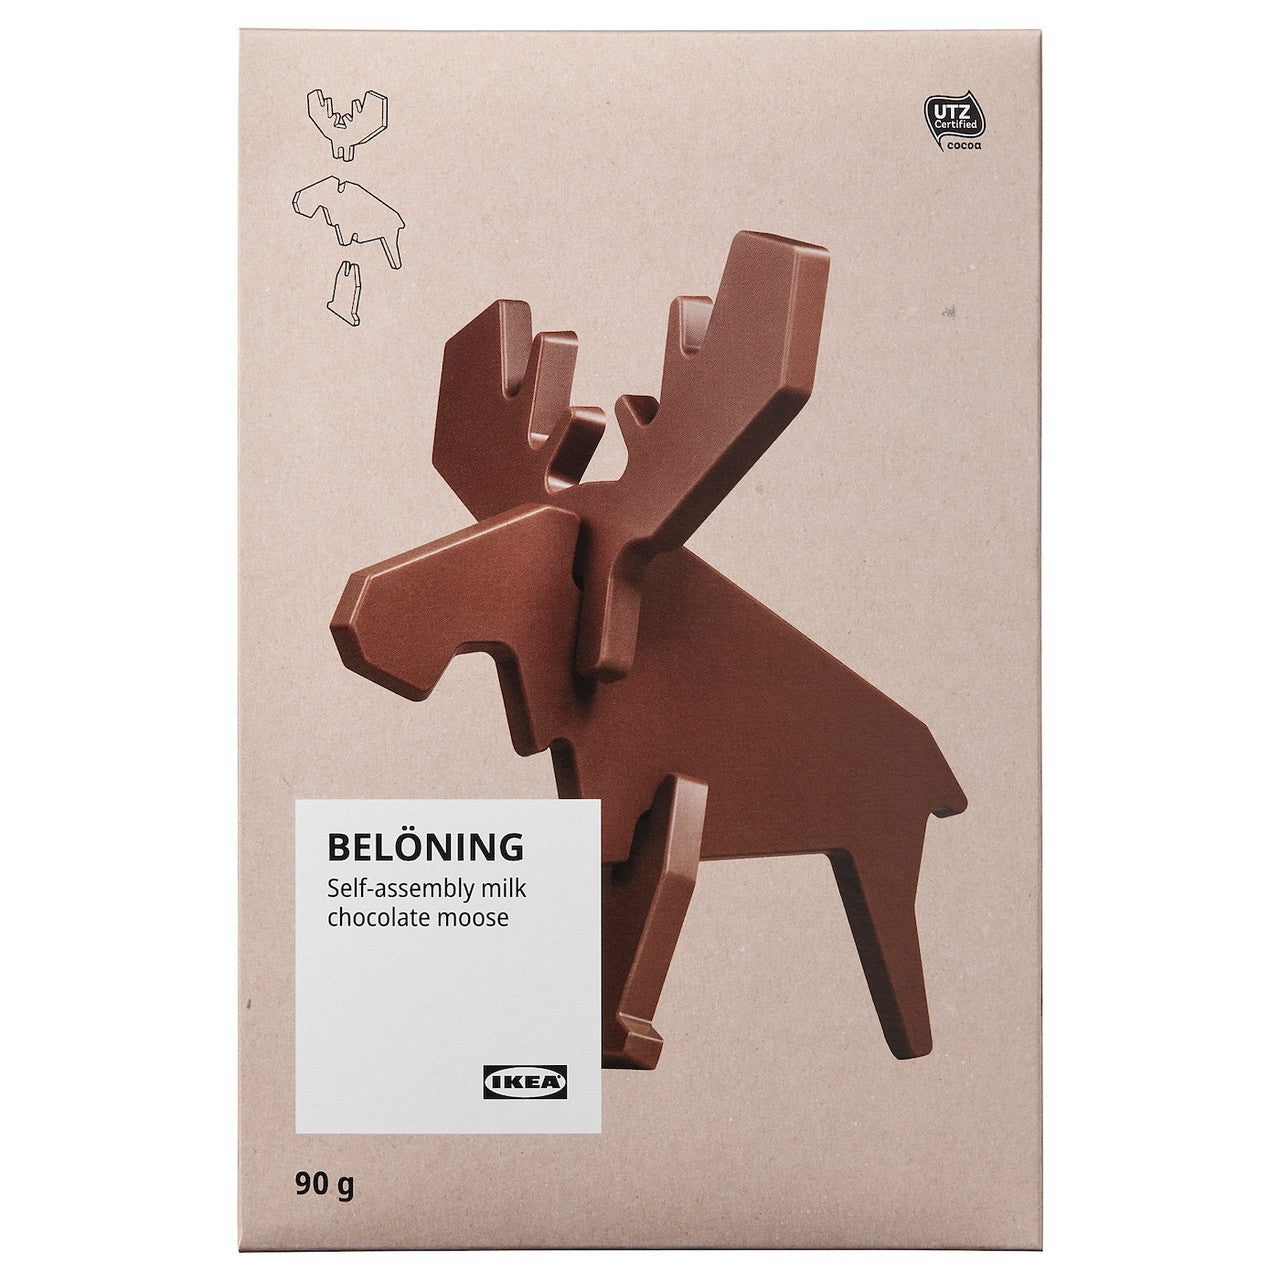 IKEA BELÖNING Self-Assembly Milk Chocolate Moose, 90g/3.15 oz. {Imported from Canada}